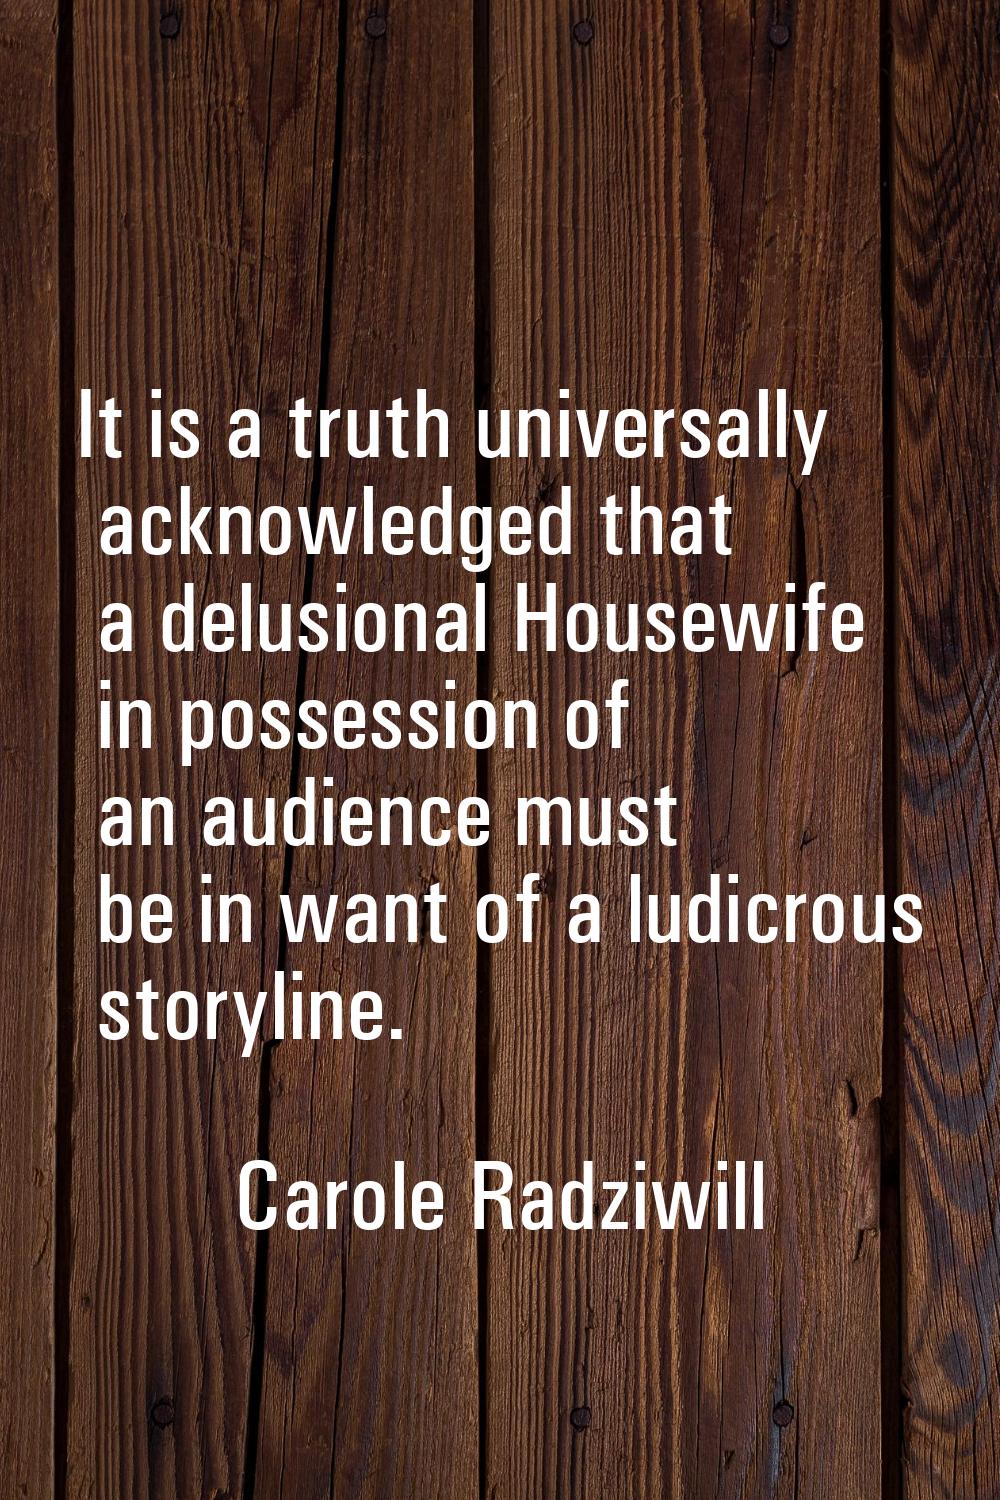 It is a truth universally acknowledged that a delusional Housewife in possession of an audience mus